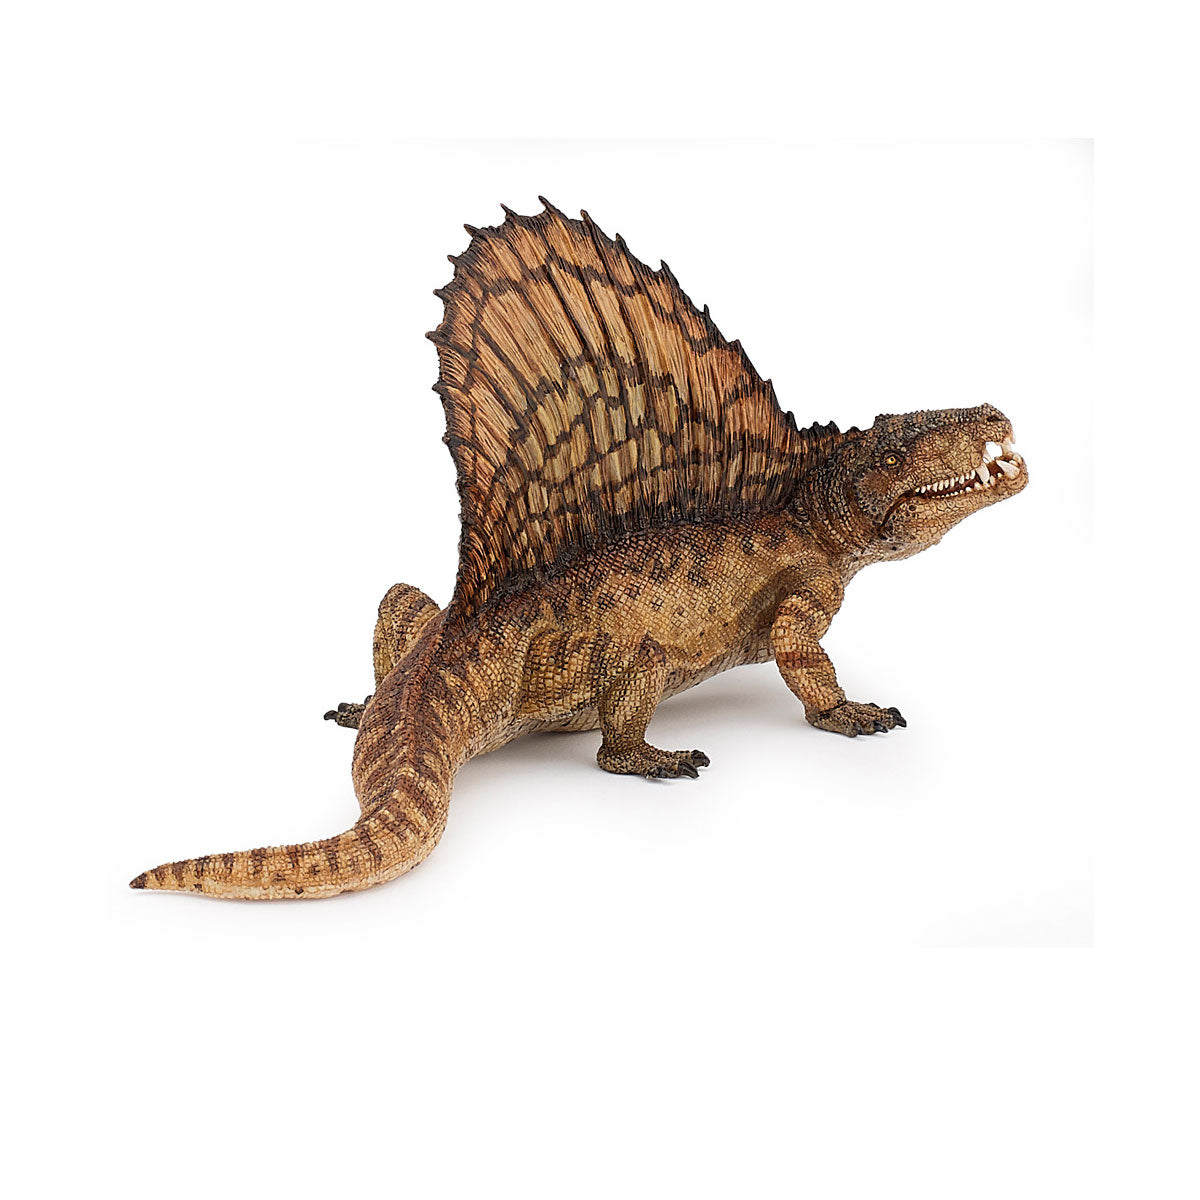 Papo Dimetrodon with Articulated Jaw